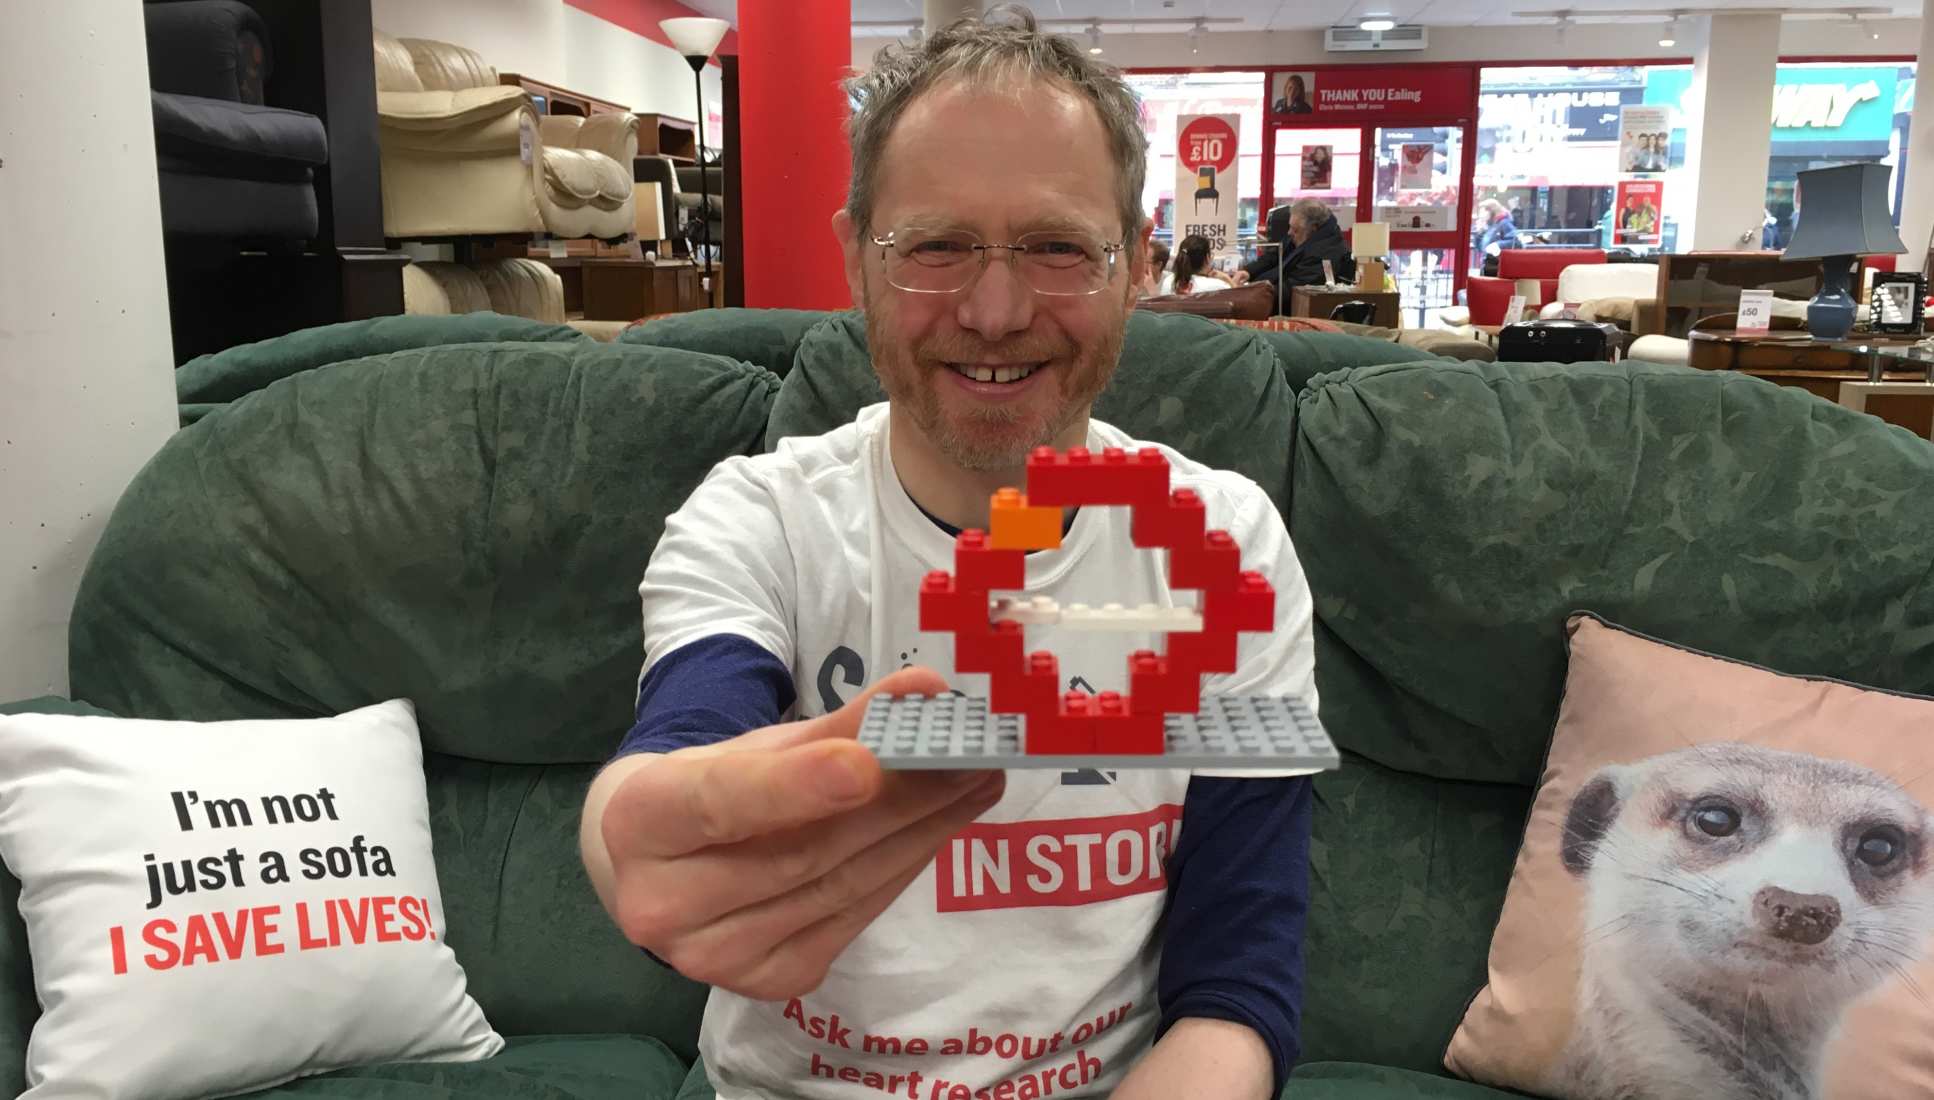 Researcher with lego blood vessel